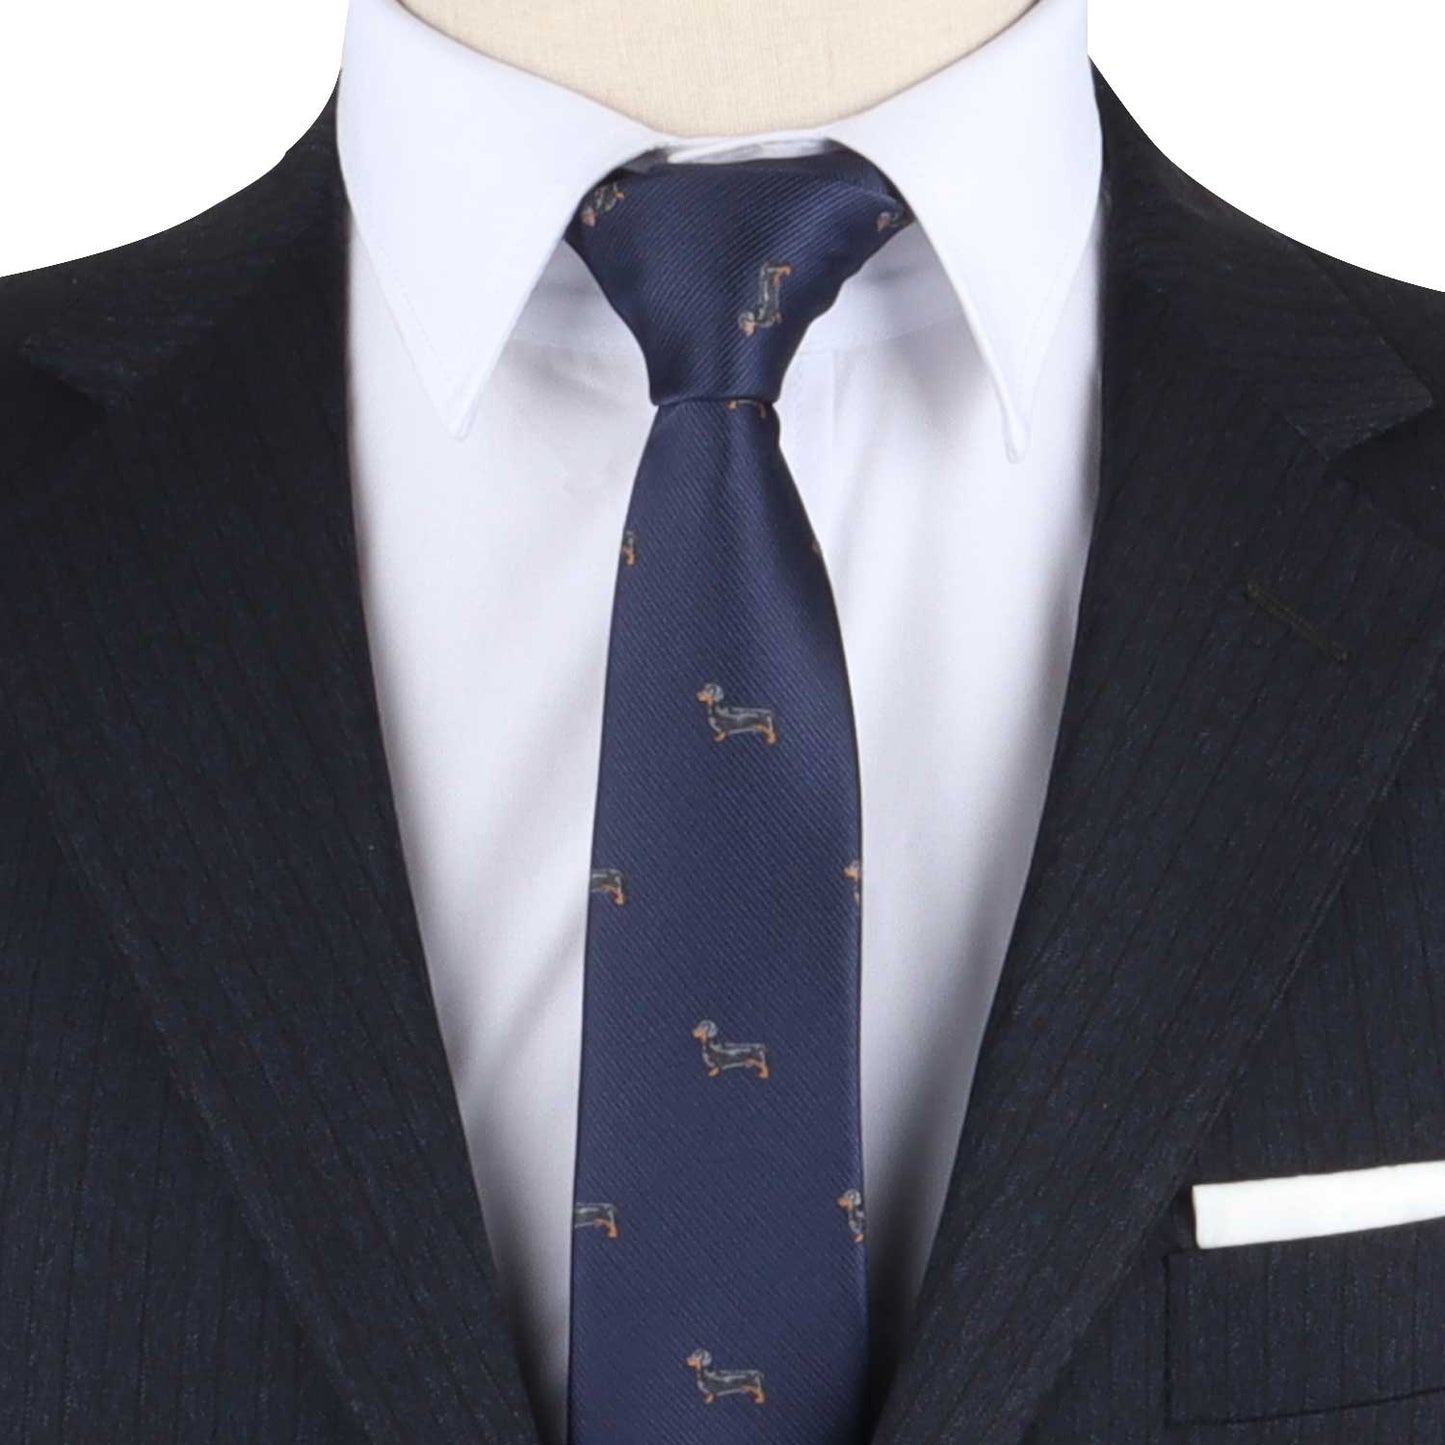 A mannequin wearing a Sausage Dog Skinny Tie with a playful look.